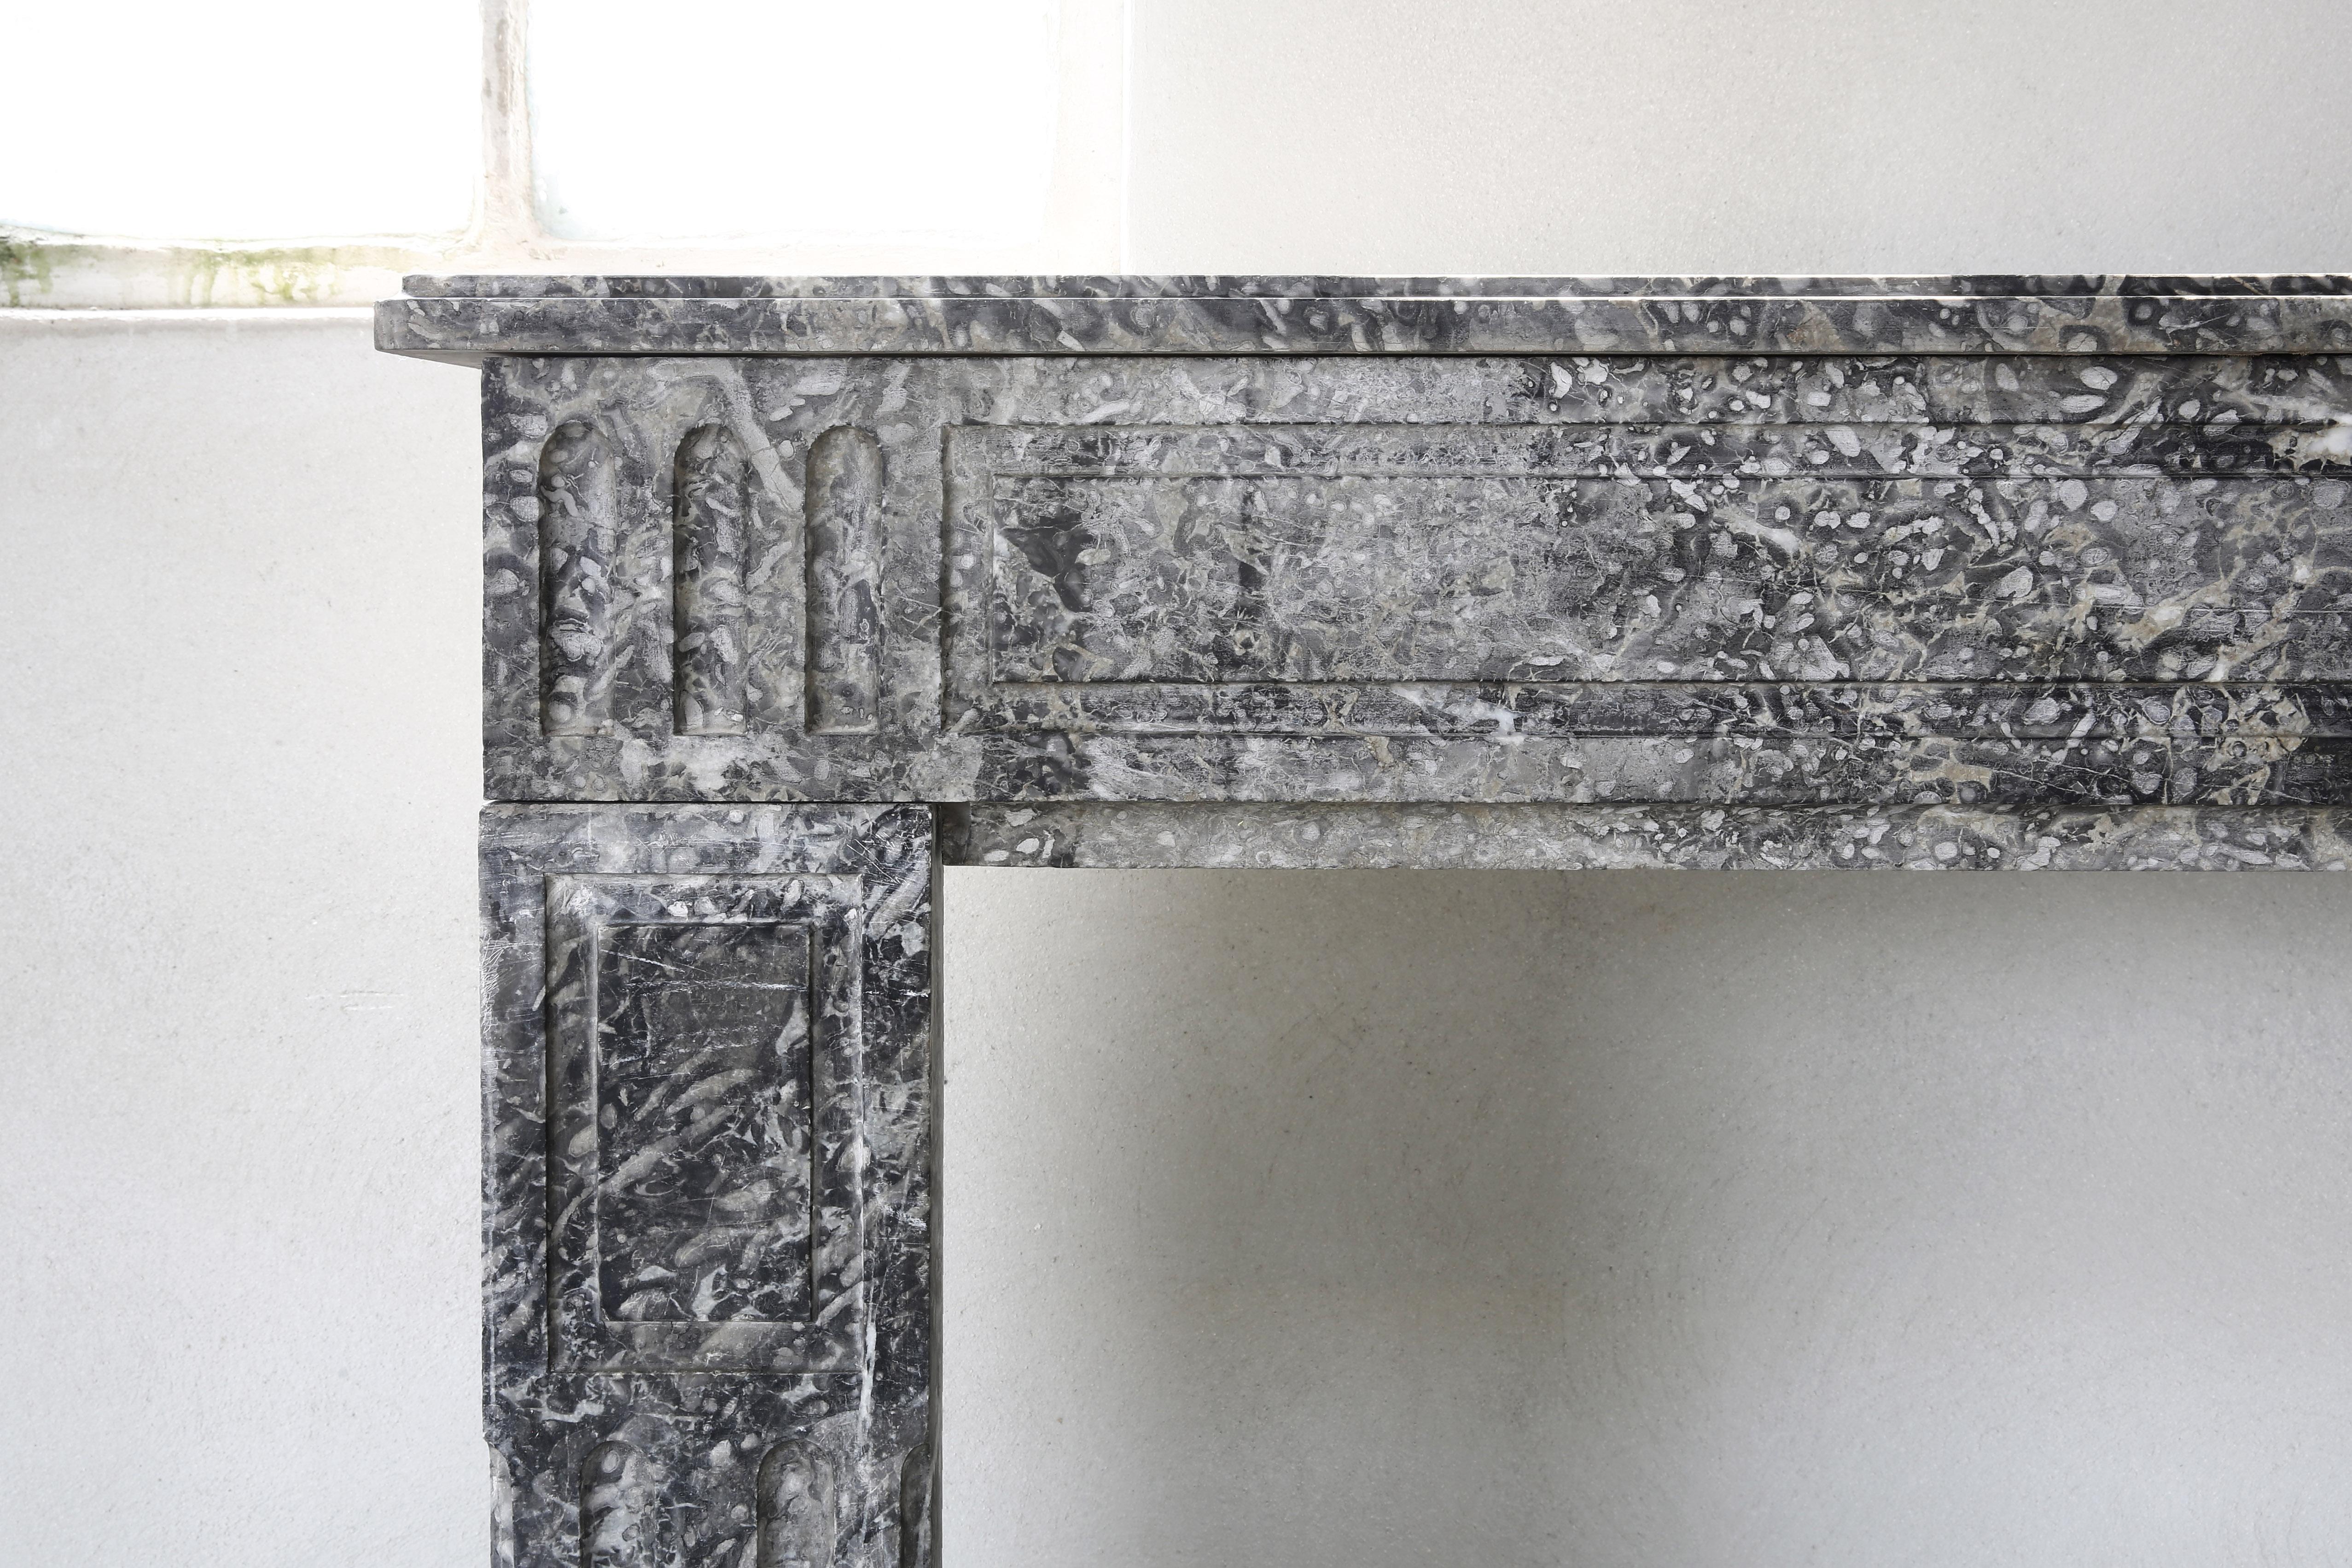 Other Antique Marble Fireplace from the 19th Century, Style of Louis XVI